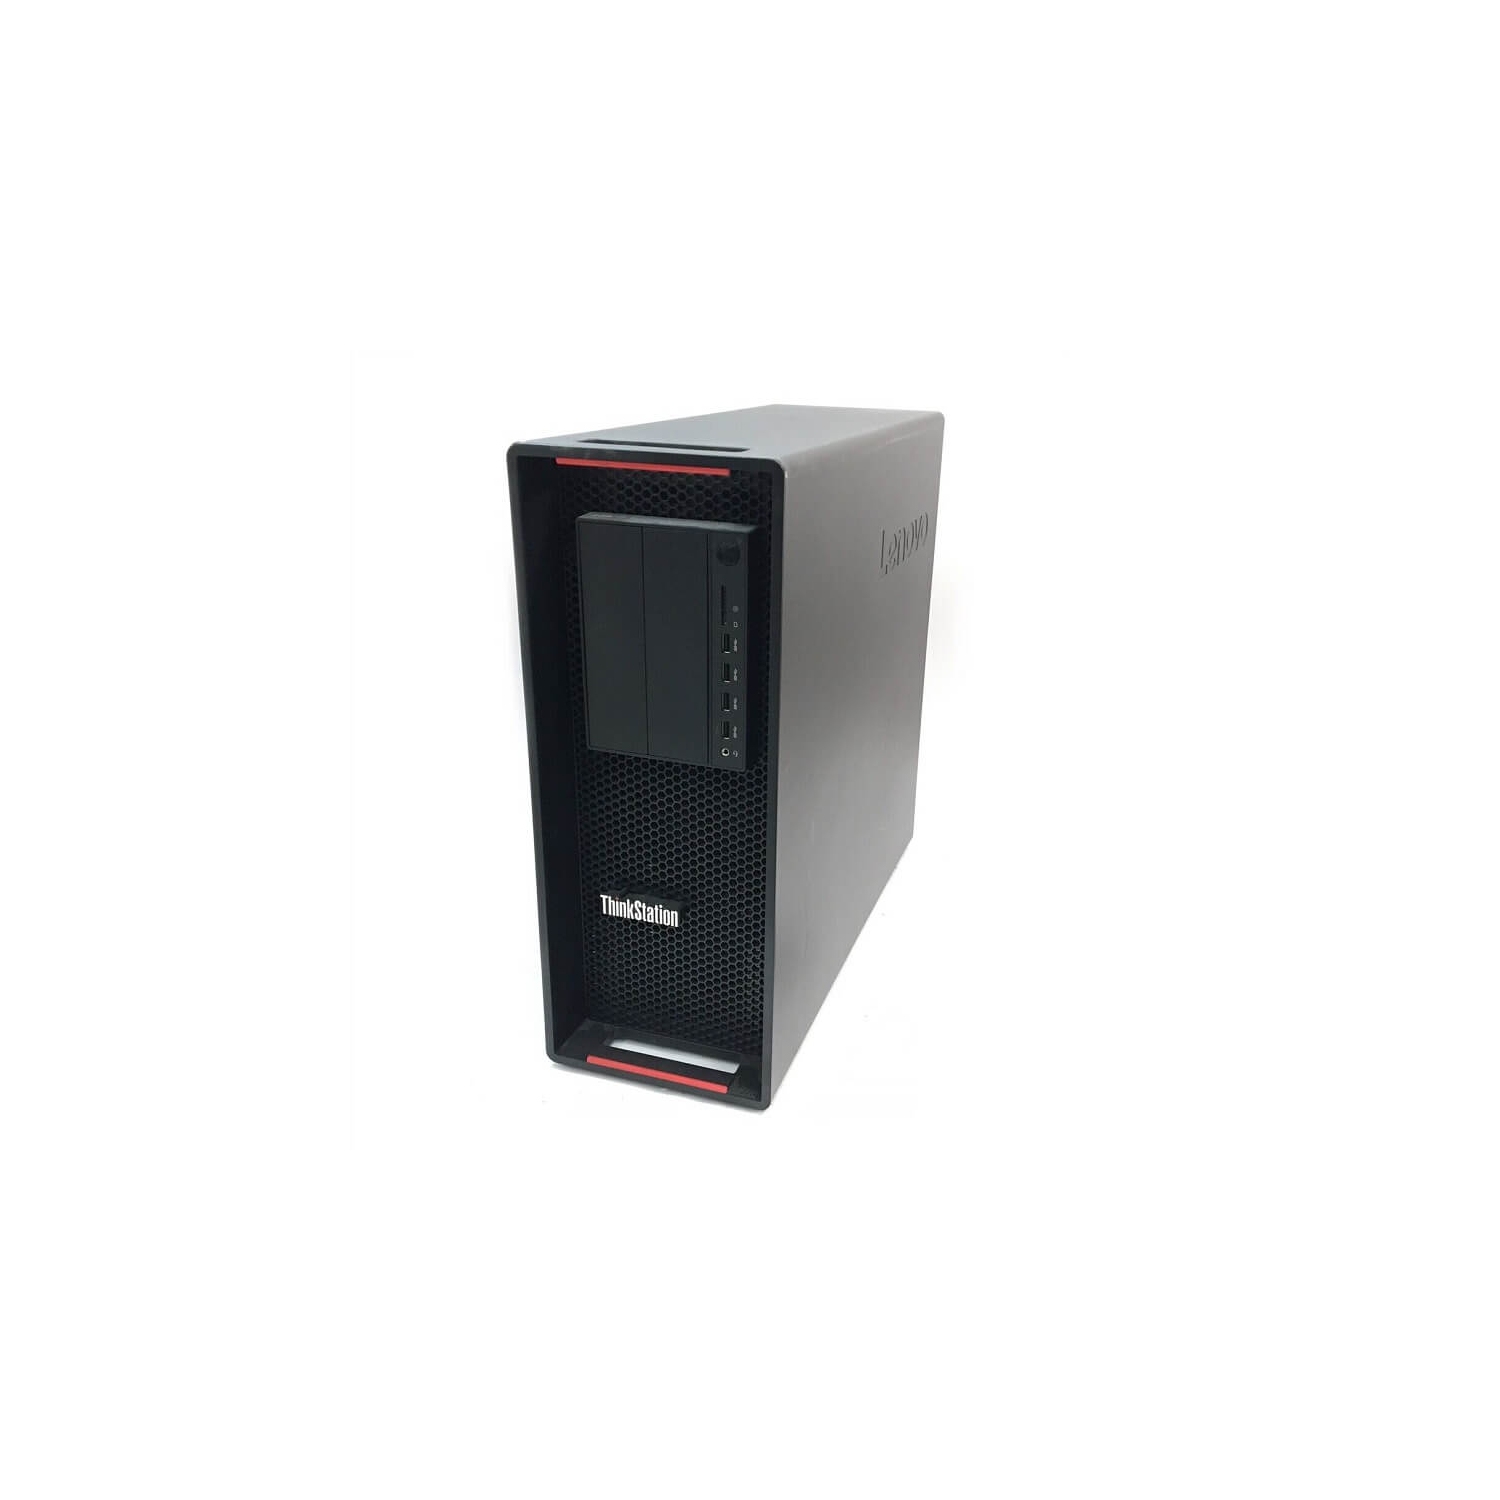 Refurbished (Good) - Lenovo ThinkStation P720 Workstation 2x Gold 6154 Eighteen Core 3Ghz 128GB DDR4 500GB NVMe RTX A2000 Win 11 Pro